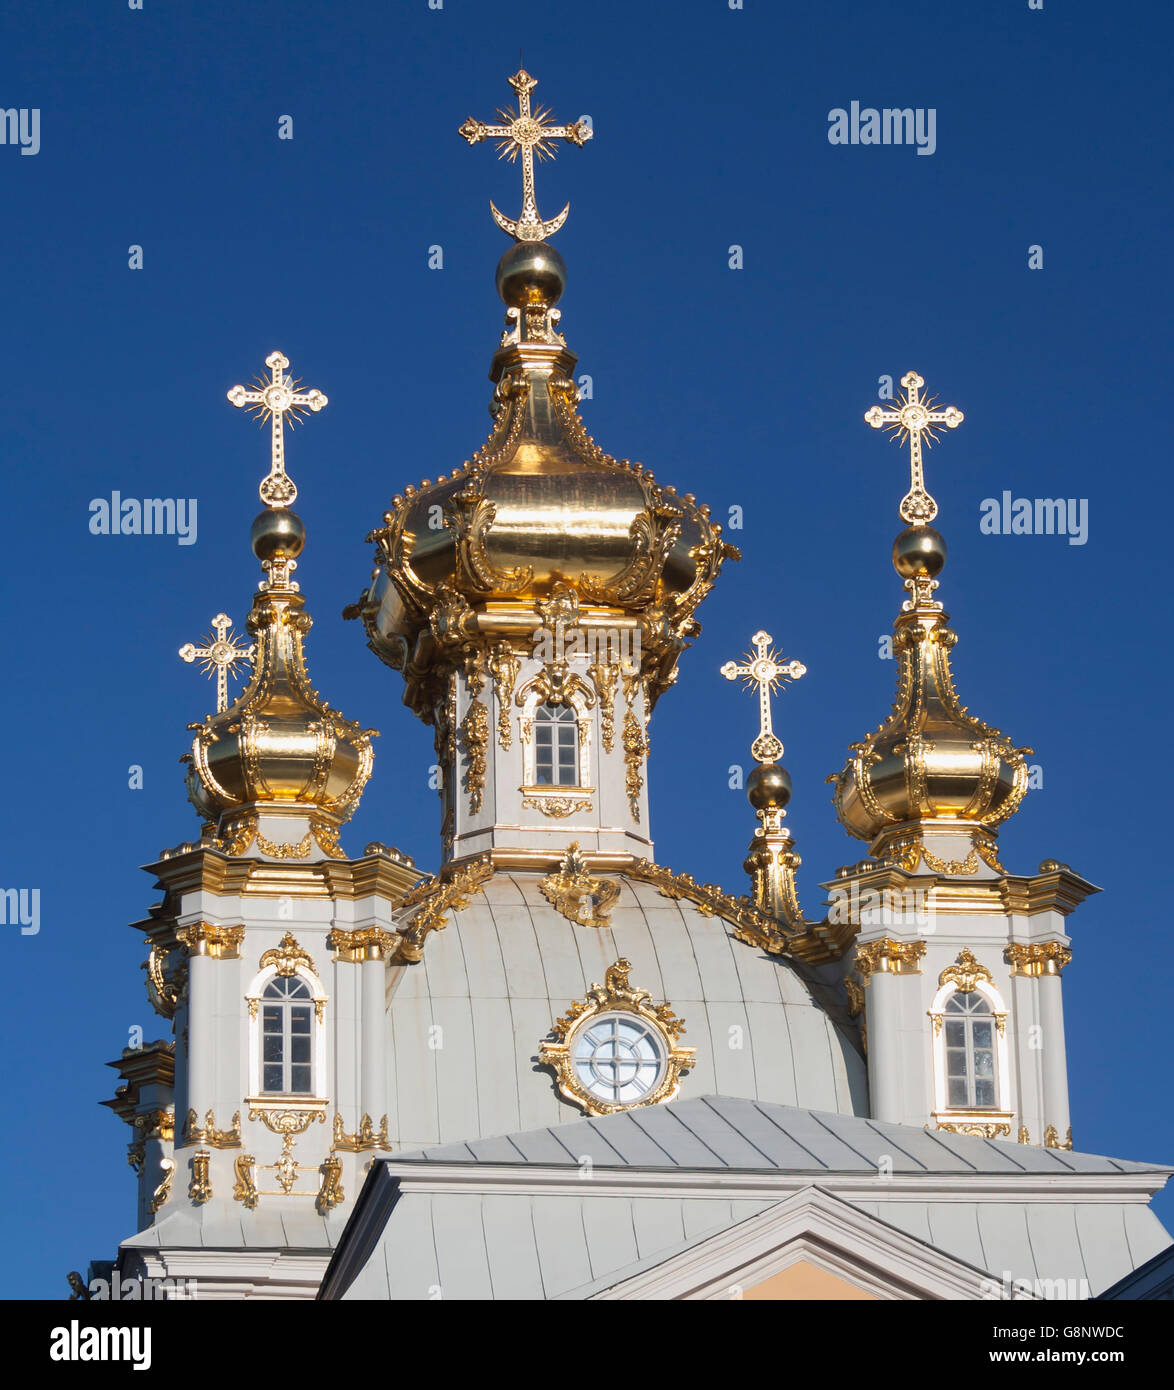 golden domes of church in peterhof russia Stock Photo